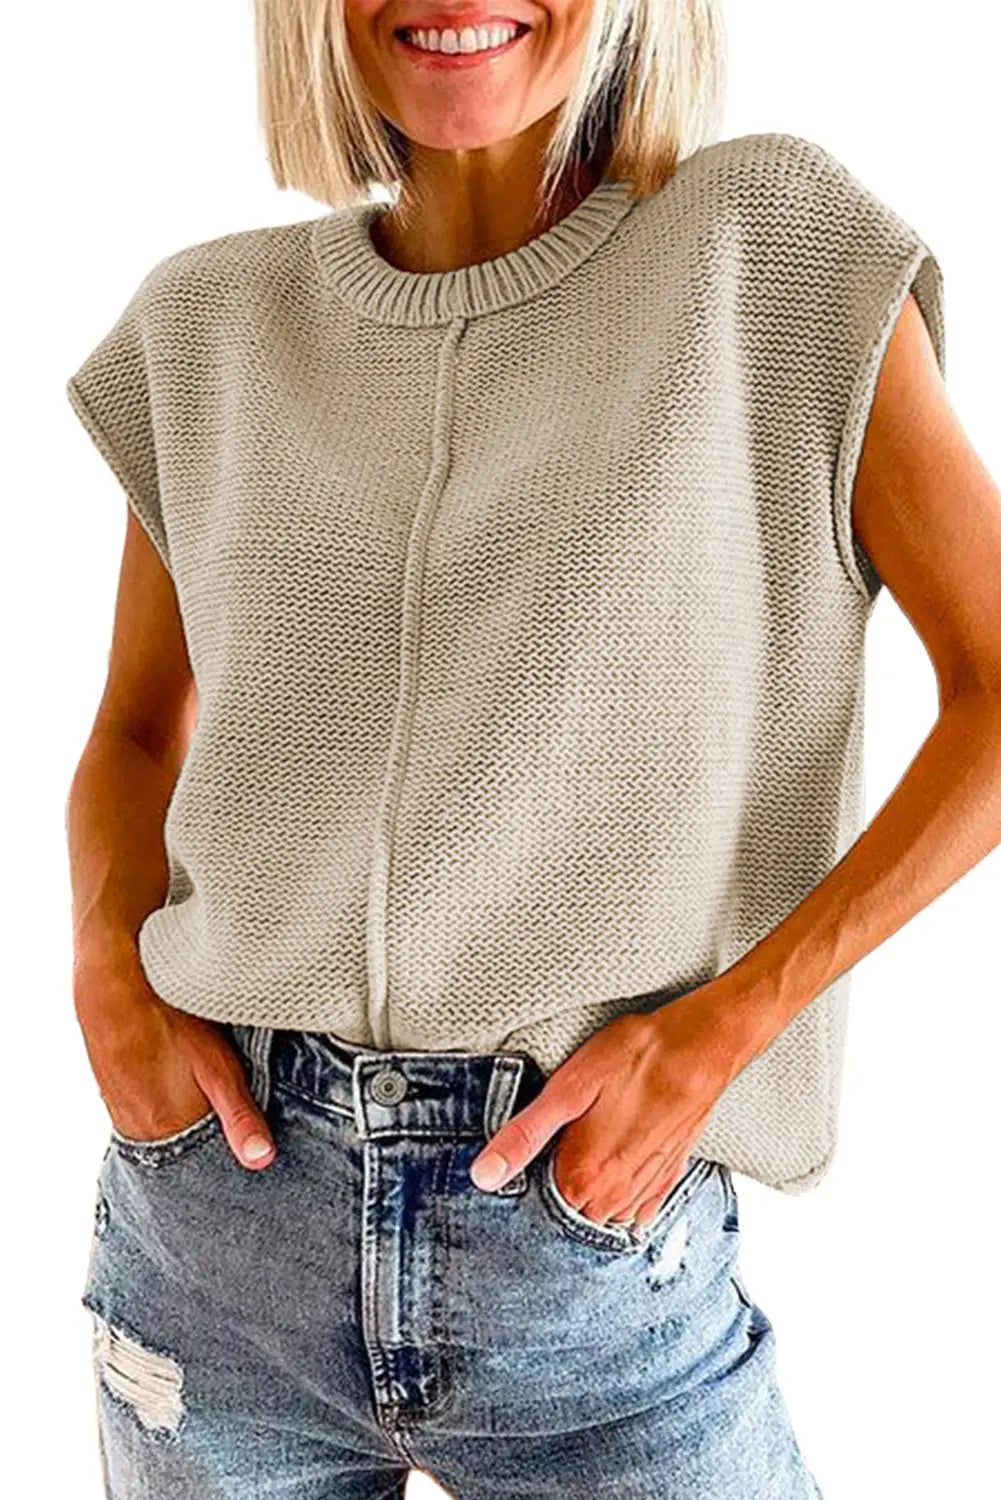 Oatmeal solid color cap sleeve knitted sweater - sweaters & cardigans